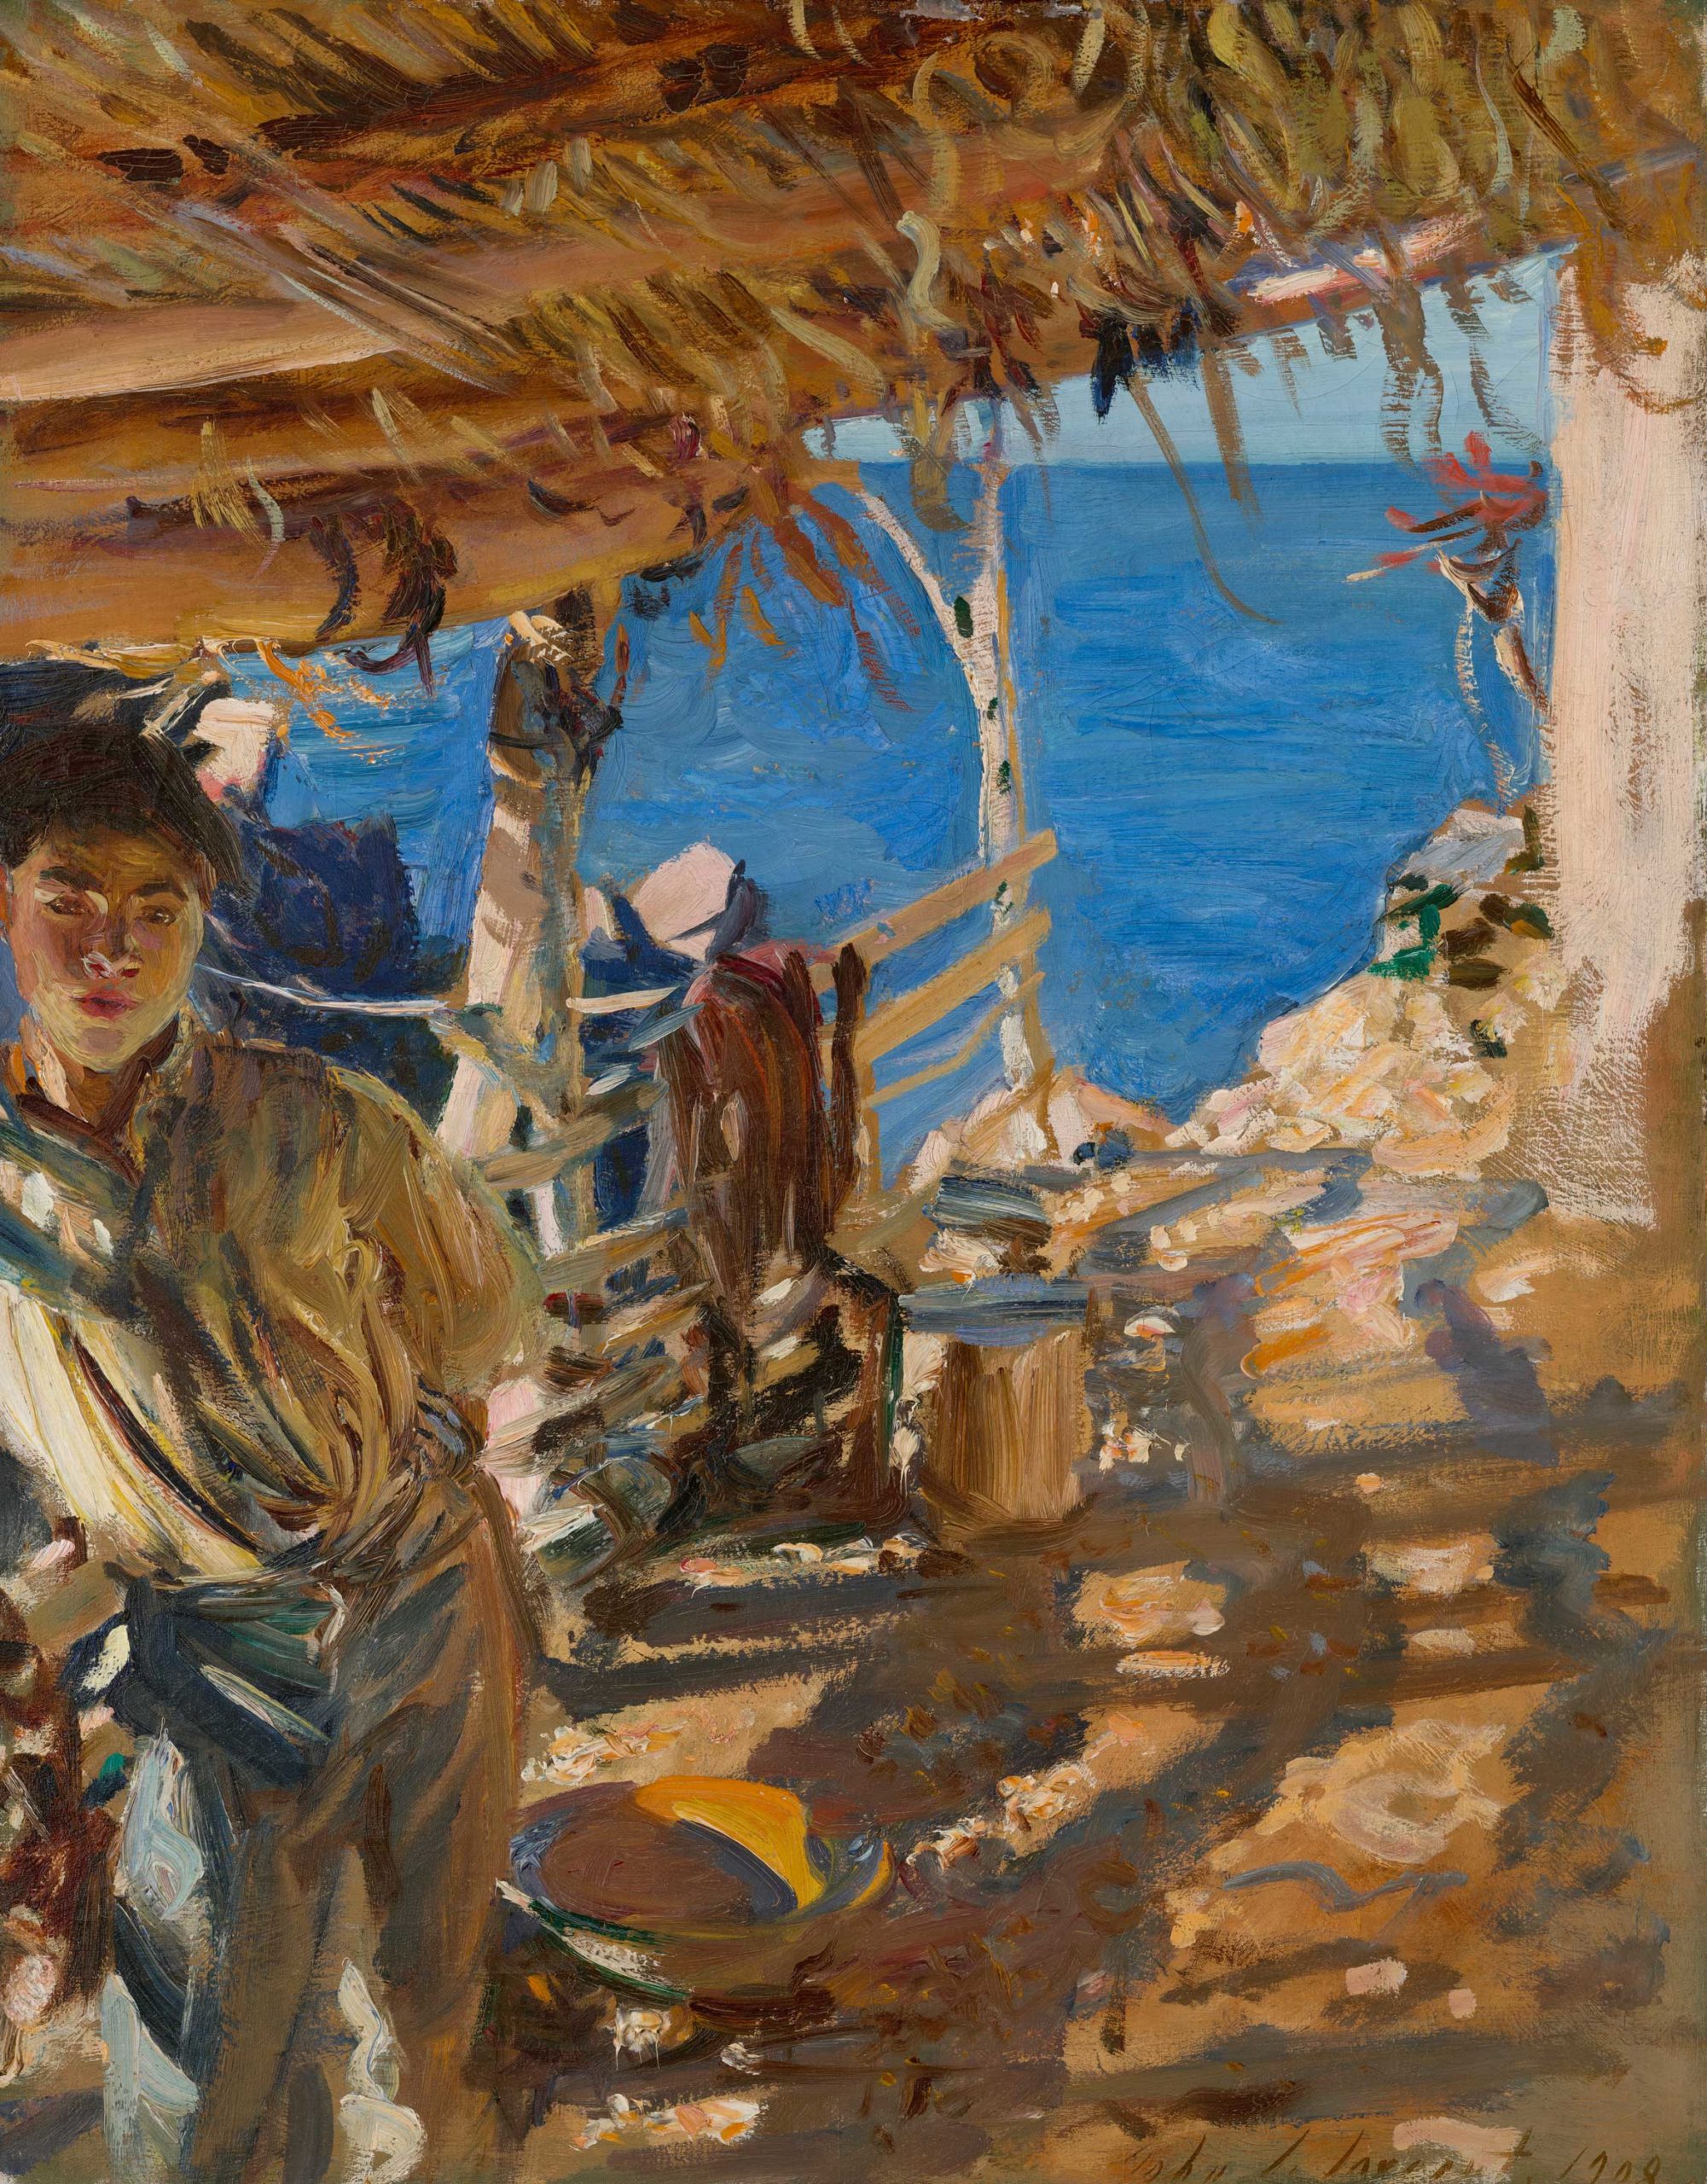 John Singer Sargent, "Majorcan Fisherman," 1908, oil on canvas, framed: 89.54 x 74.93 x 6.67 cm (35 1/4 x 29 1/2 x 2 5/8 in.), image: 69.85 x 54.61 cm (27 1/2 x 21 1/2 in.), private collection